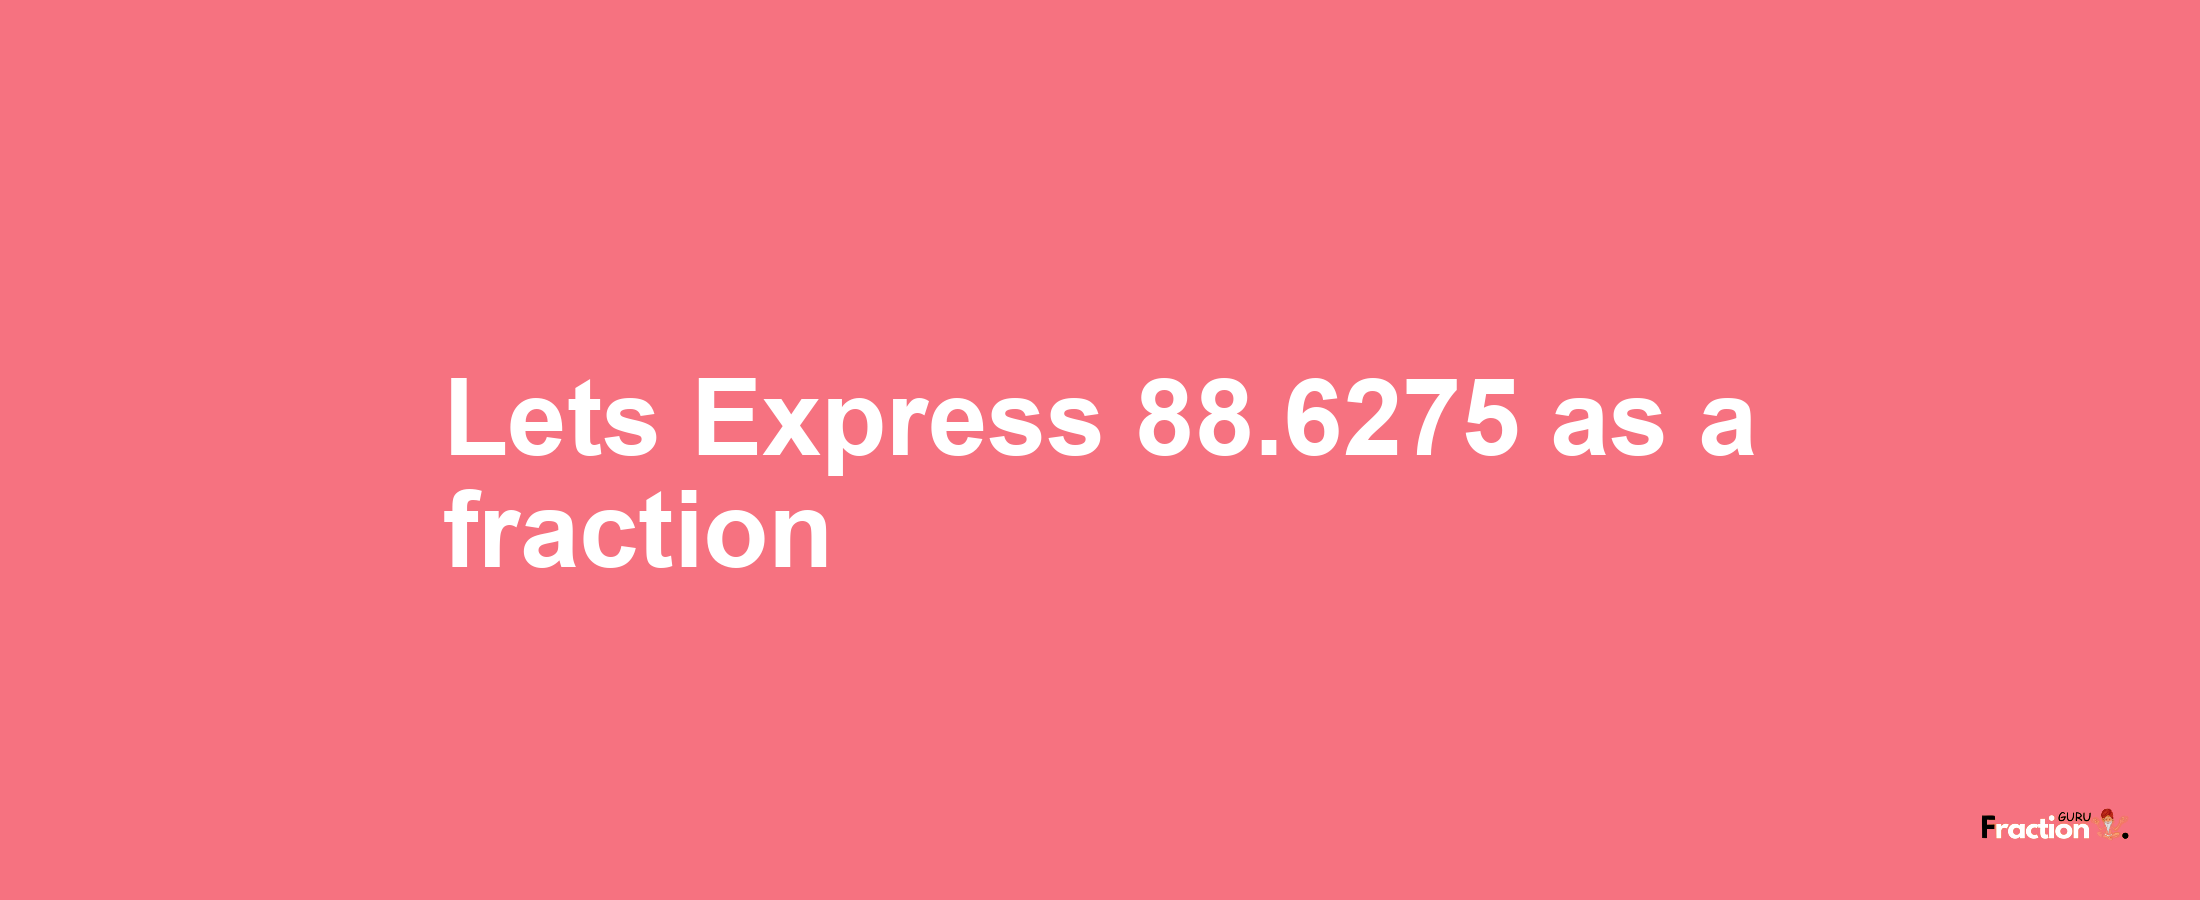 Lets Express 88.6275 as afraction